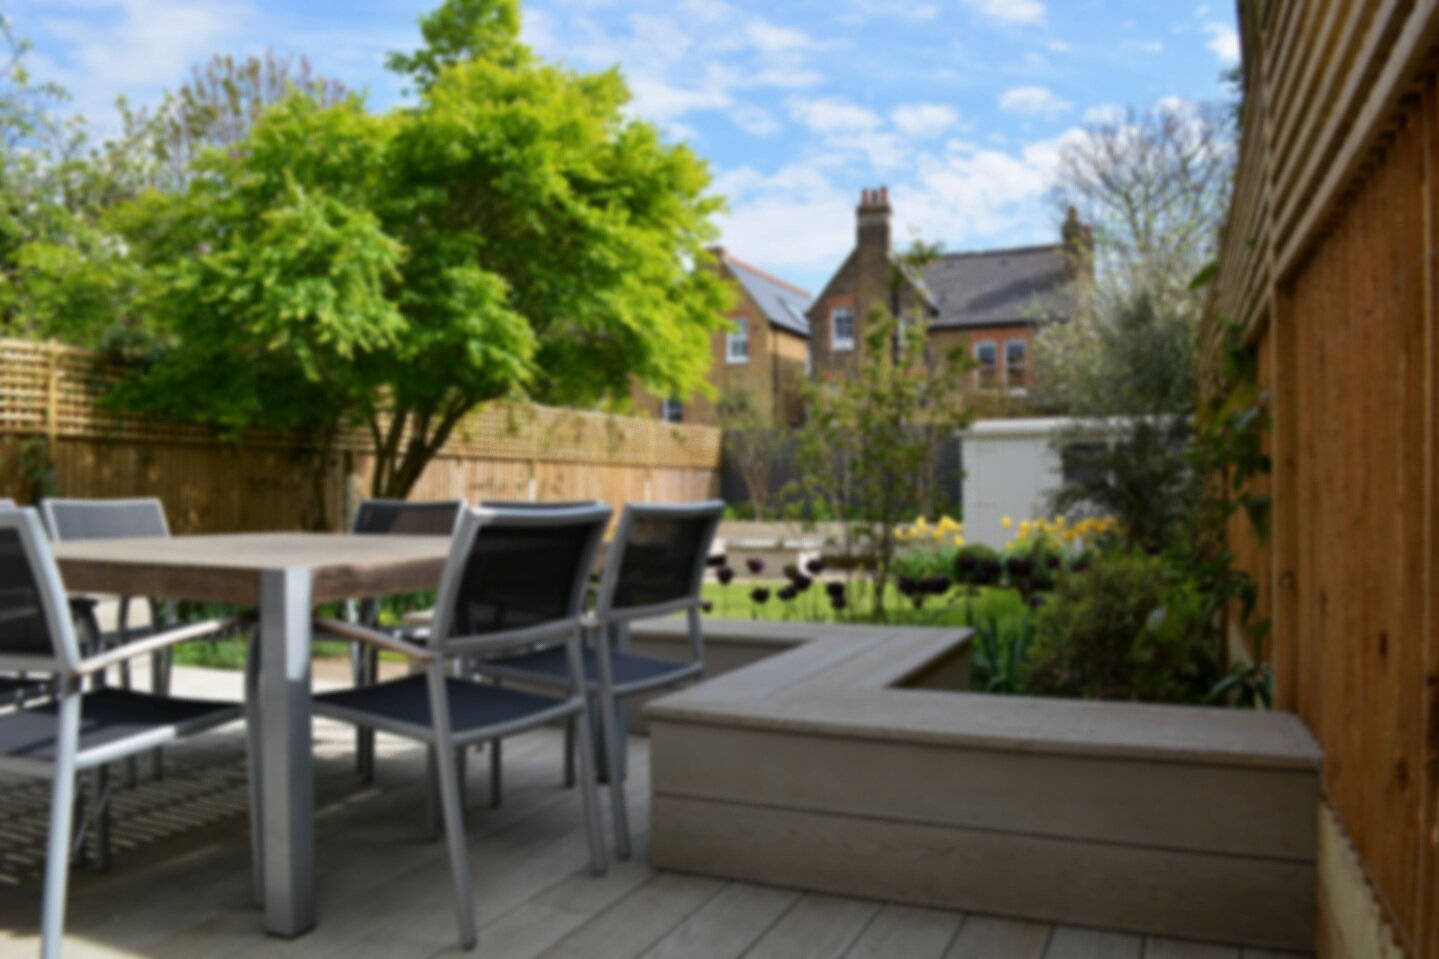  Garden Design &amp; Landscaping   Blending modern and traditional to create stylish London gardens    View Our Work  